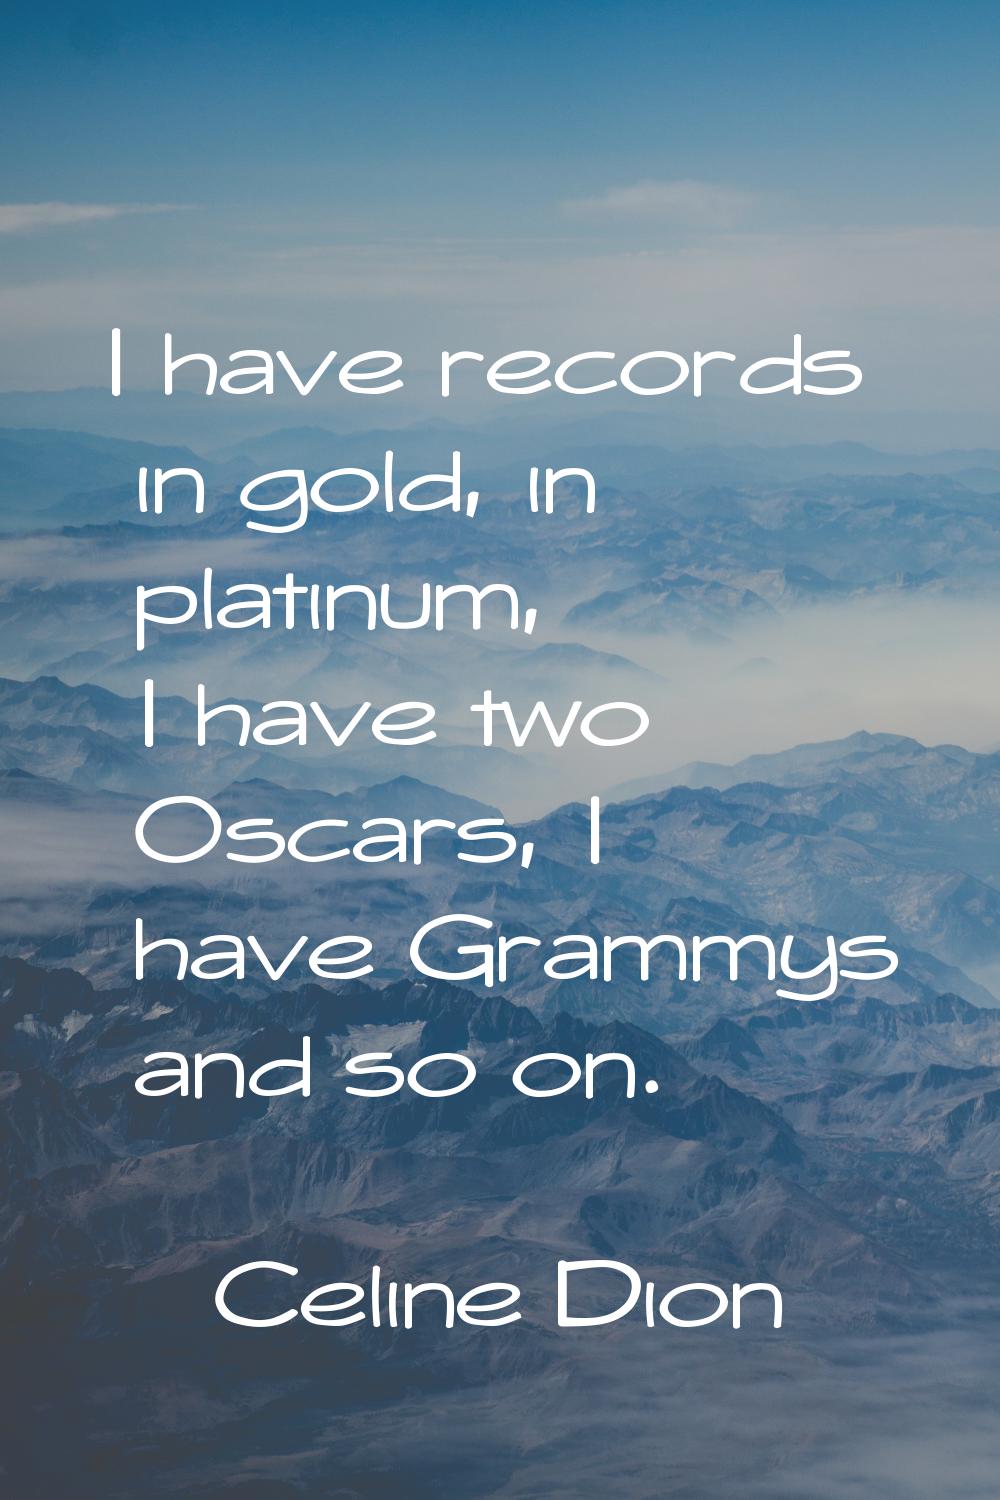 I have records in gold, in platinum, I have two Oscars, I have Grammys and so on.